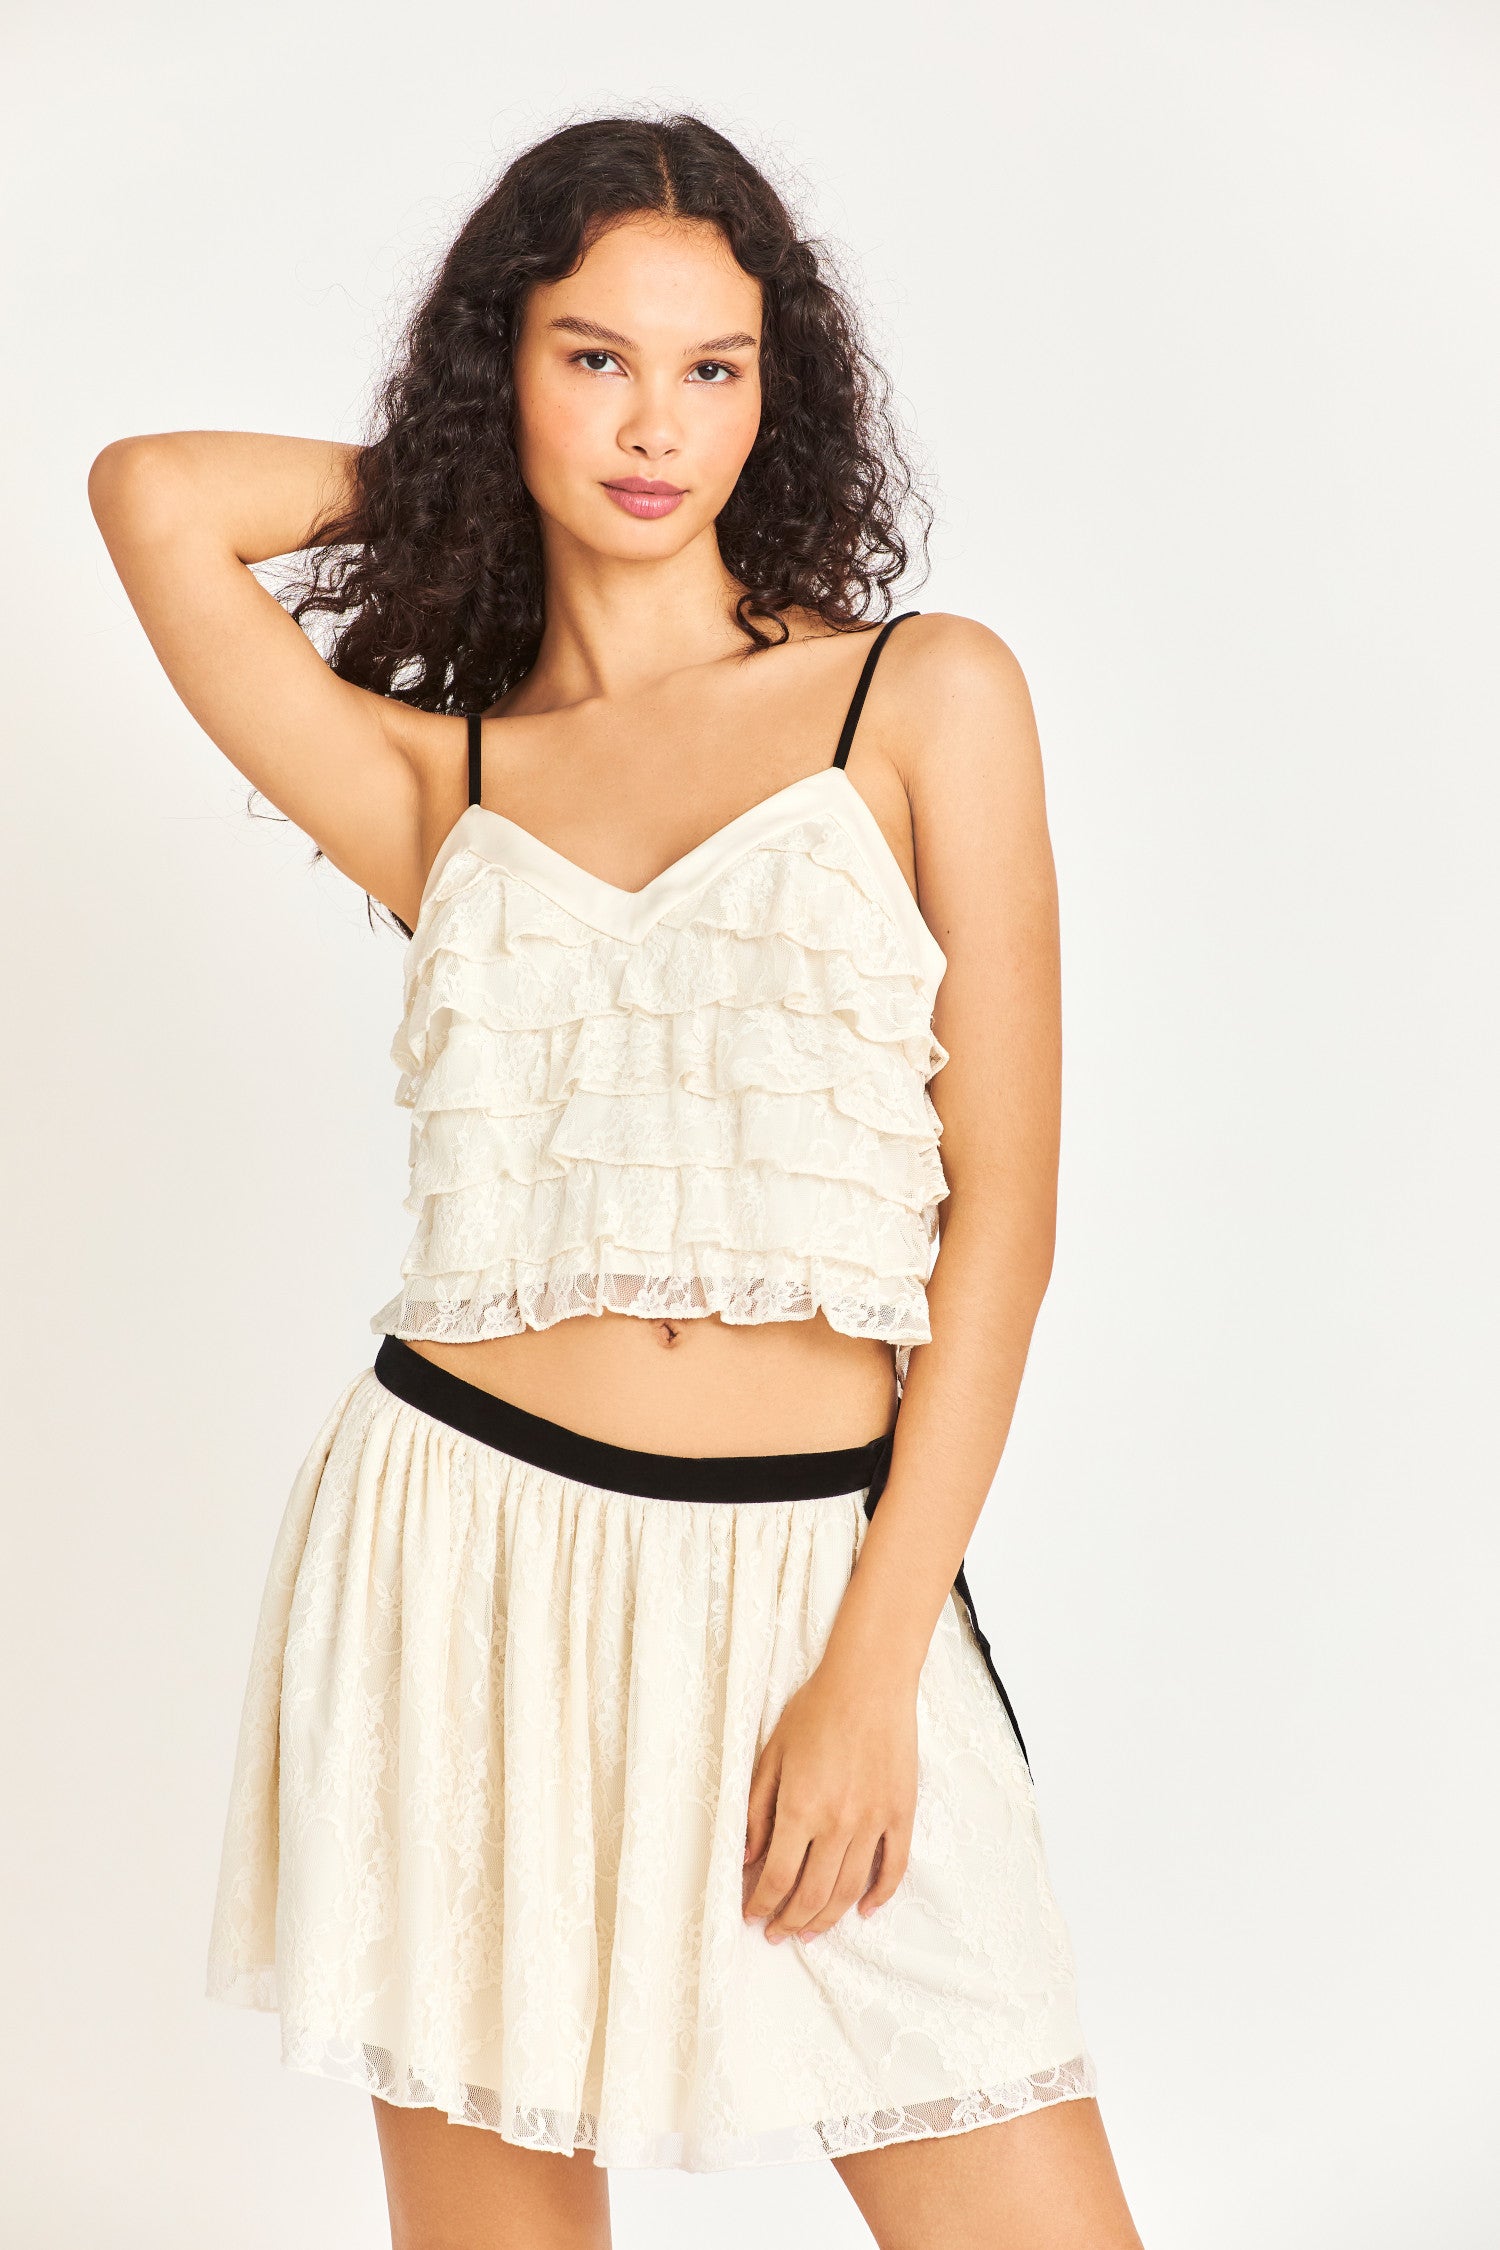 Model wearing white ruffle top with black straps